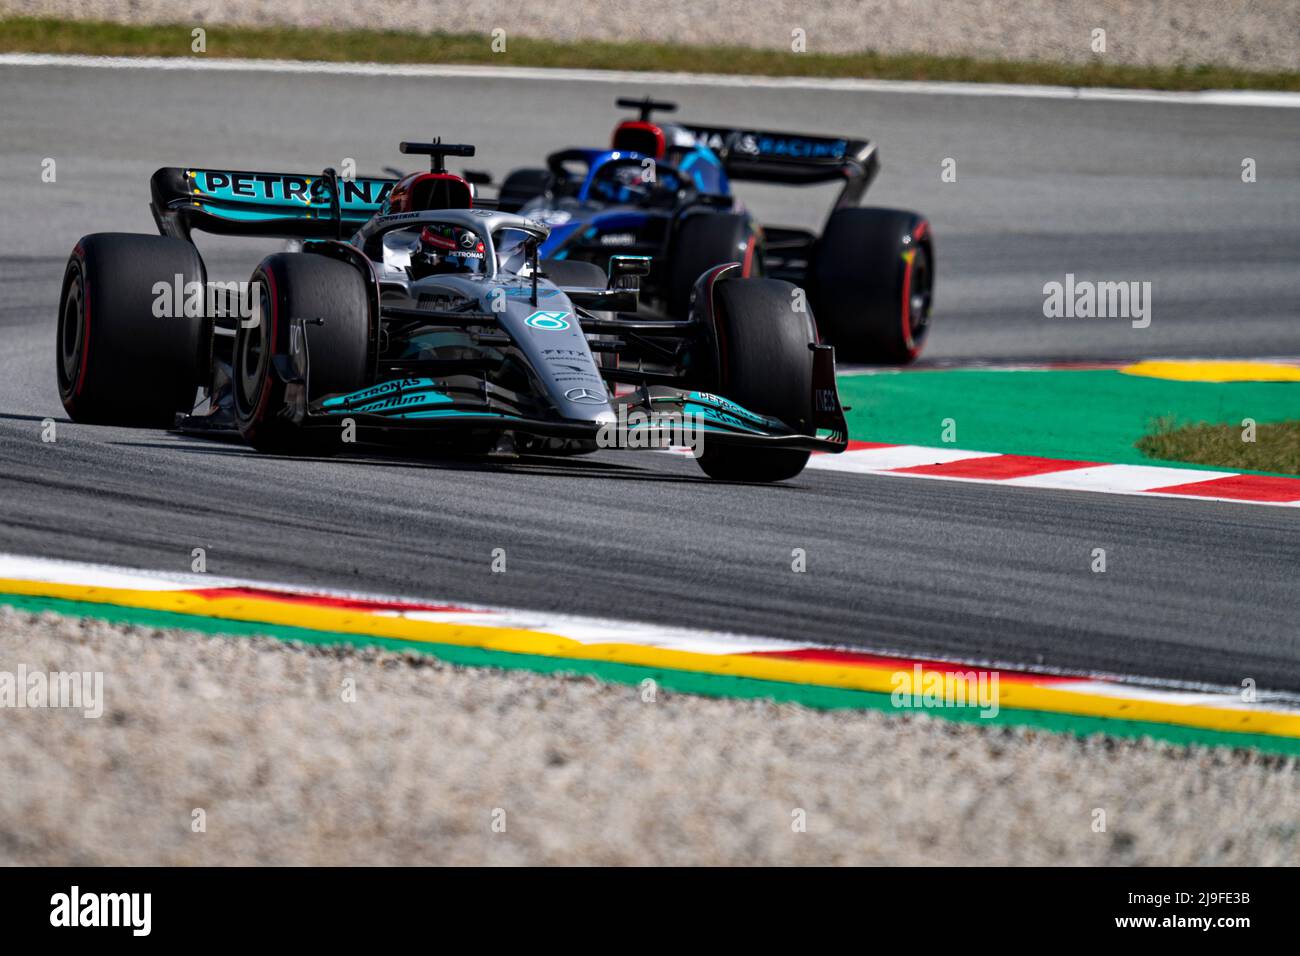 Barcelona, Spain. 21st May, 2022. George Russell of Great Britain and Mercedes drives his W13 during qualifying ahead of the F1 Grand Prix of Spain at Circuit de Barcelona-Catalunya on May 21, 2022 in Barcelona, Spain. Foto: Siu Wu. Credit: dpa/Alamy Live News Stock Photo